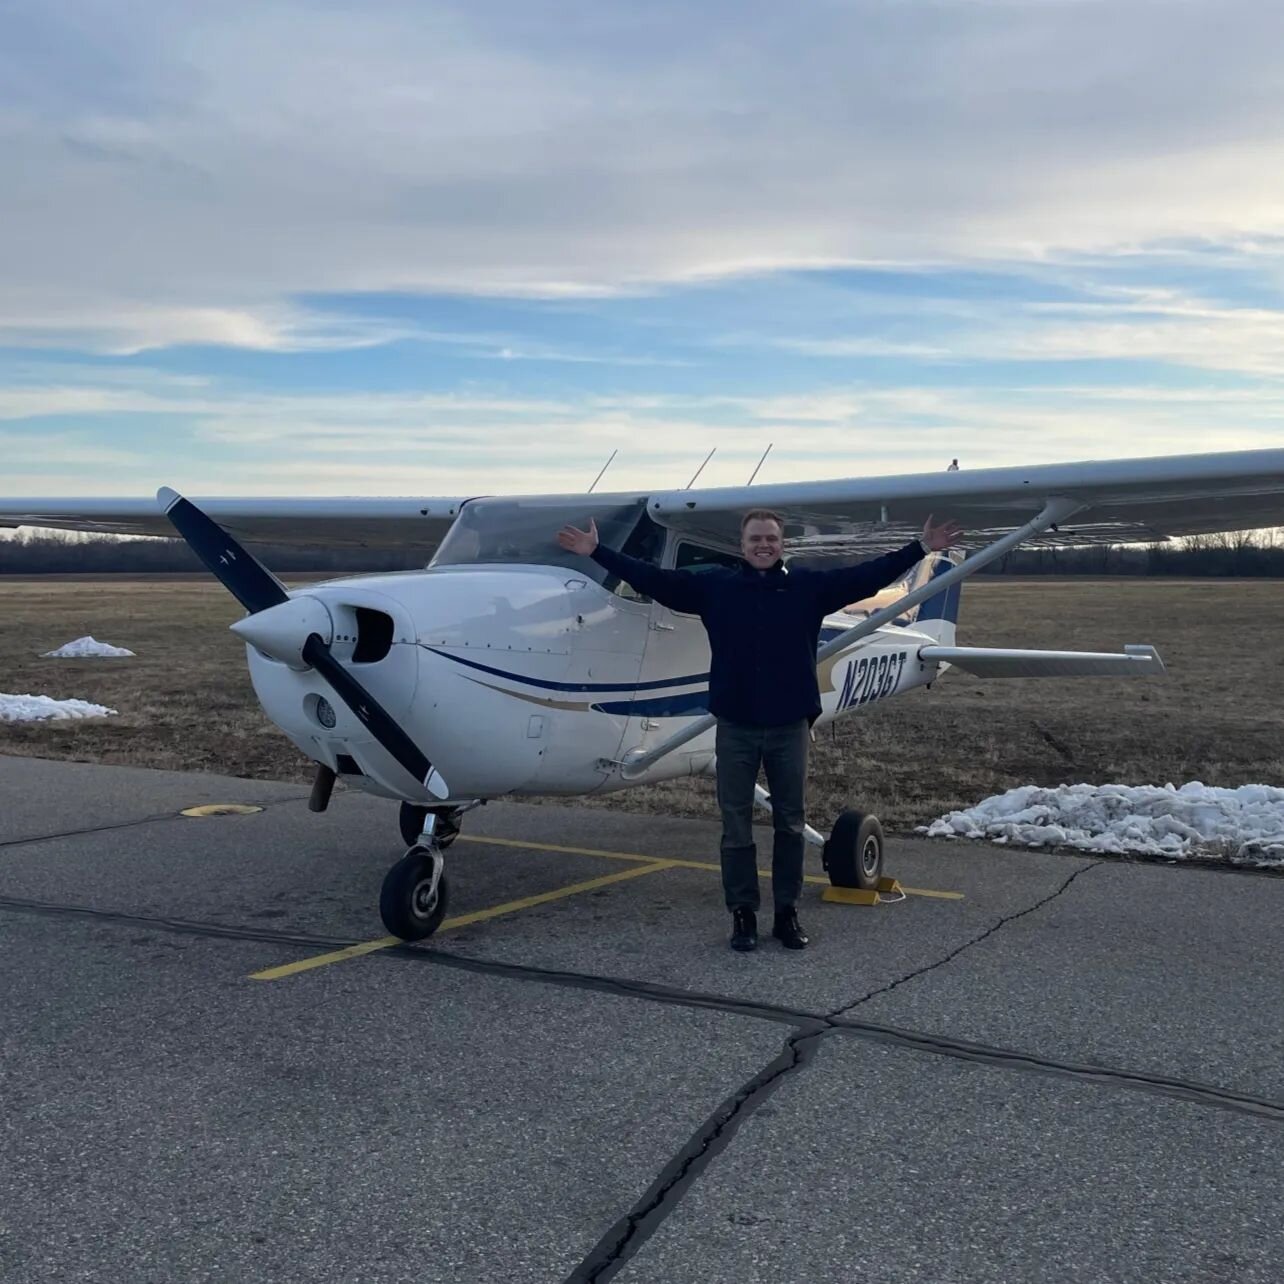 Congratulations to Michigan's newest private pilot after passing his checkride on this nice weather day in 203GT, Nicholas Kill!!!